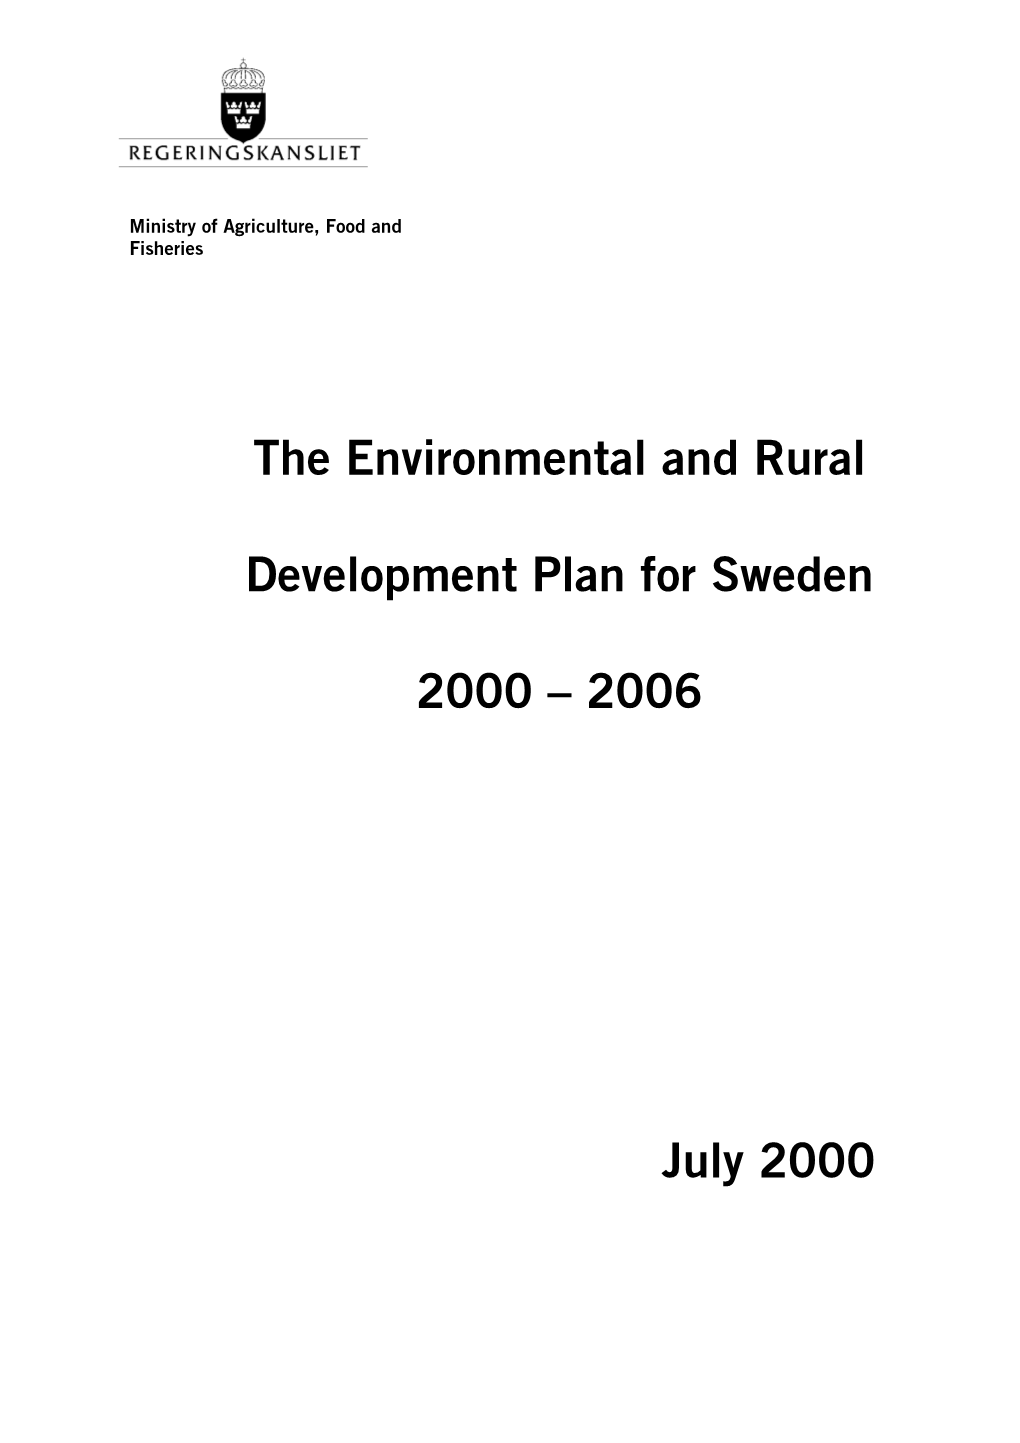 The Environmental and Rural Development Plan for Sweden